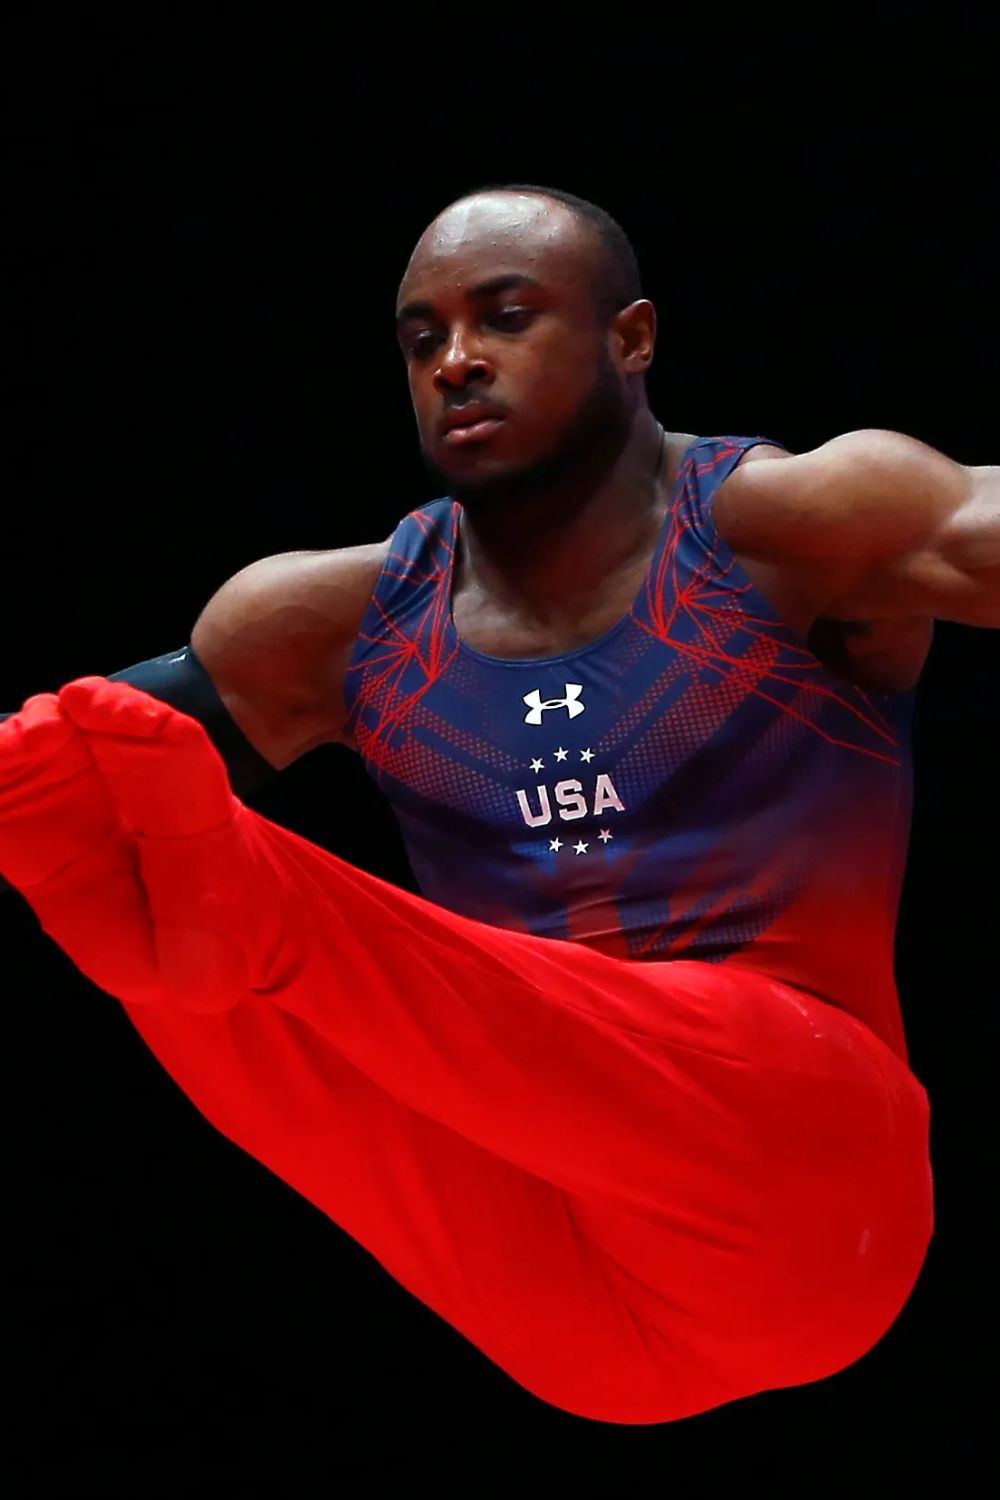 Donnell Whittenburg Is An American Artistic Gymnast 